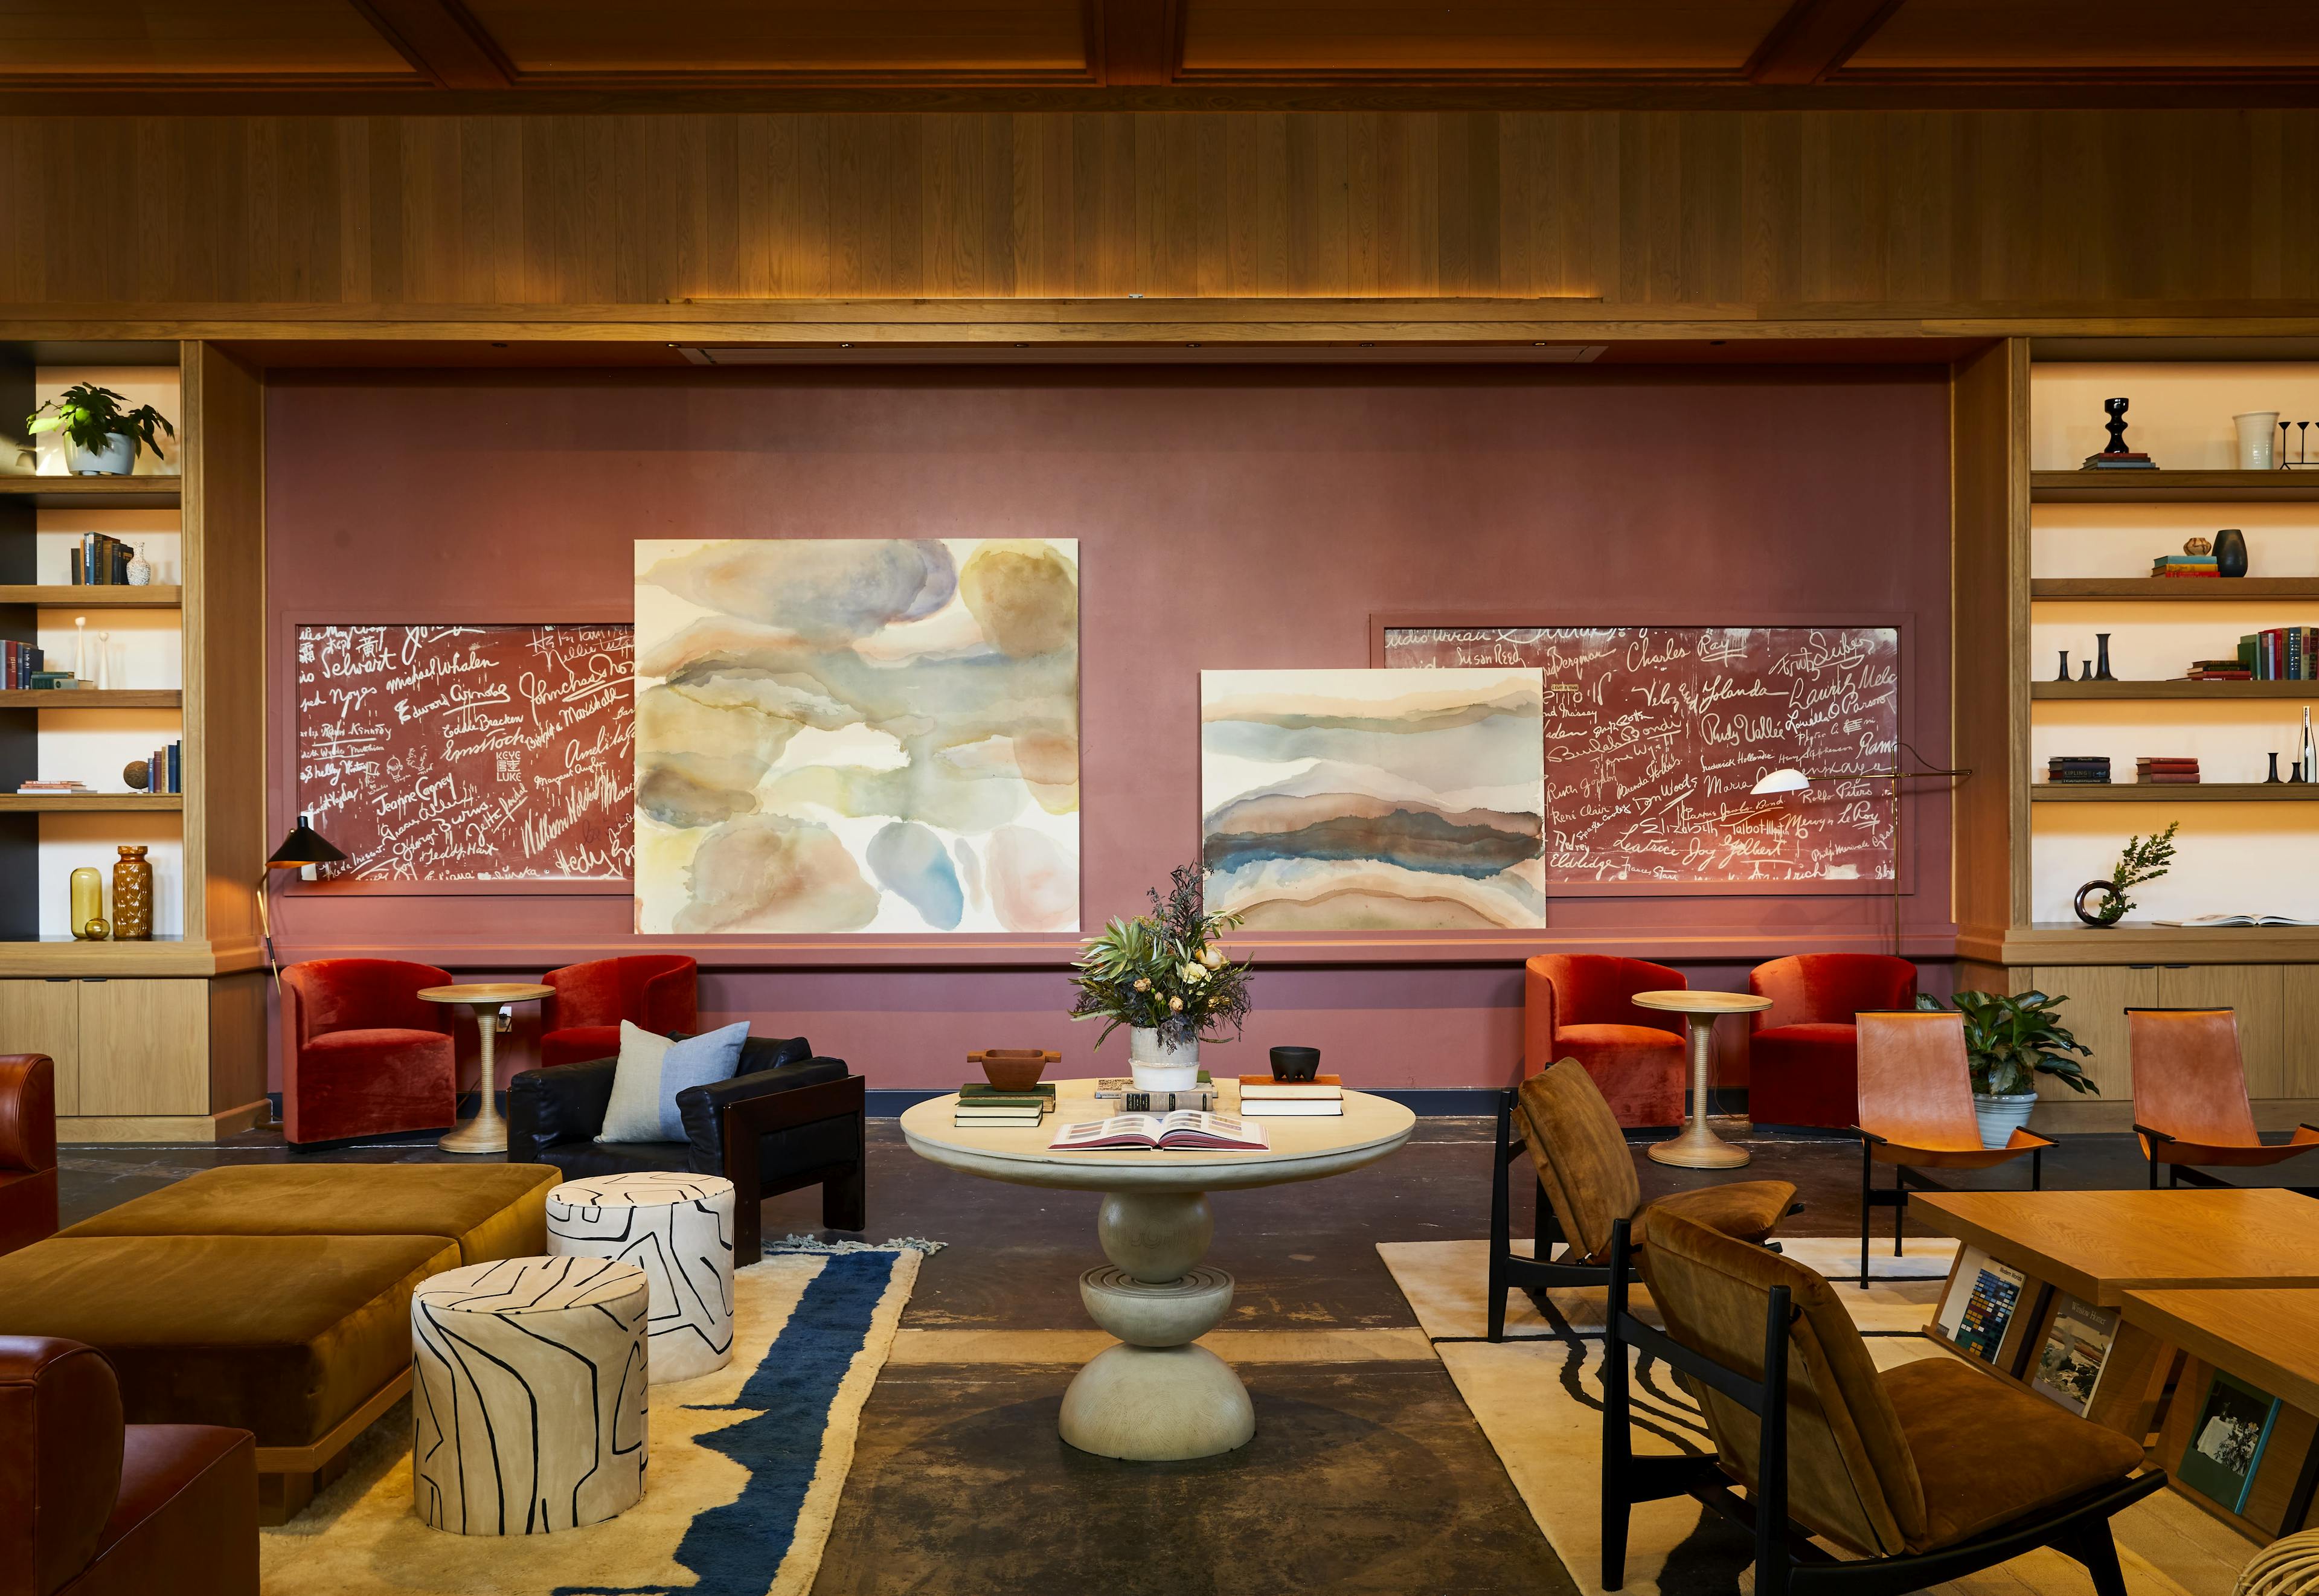 Two acrylic wash paintings by artist Erin Lynn Welsh displayed on a ledge between two bookcases within a lounge area at the Chief Los Angeles Clubhouse.